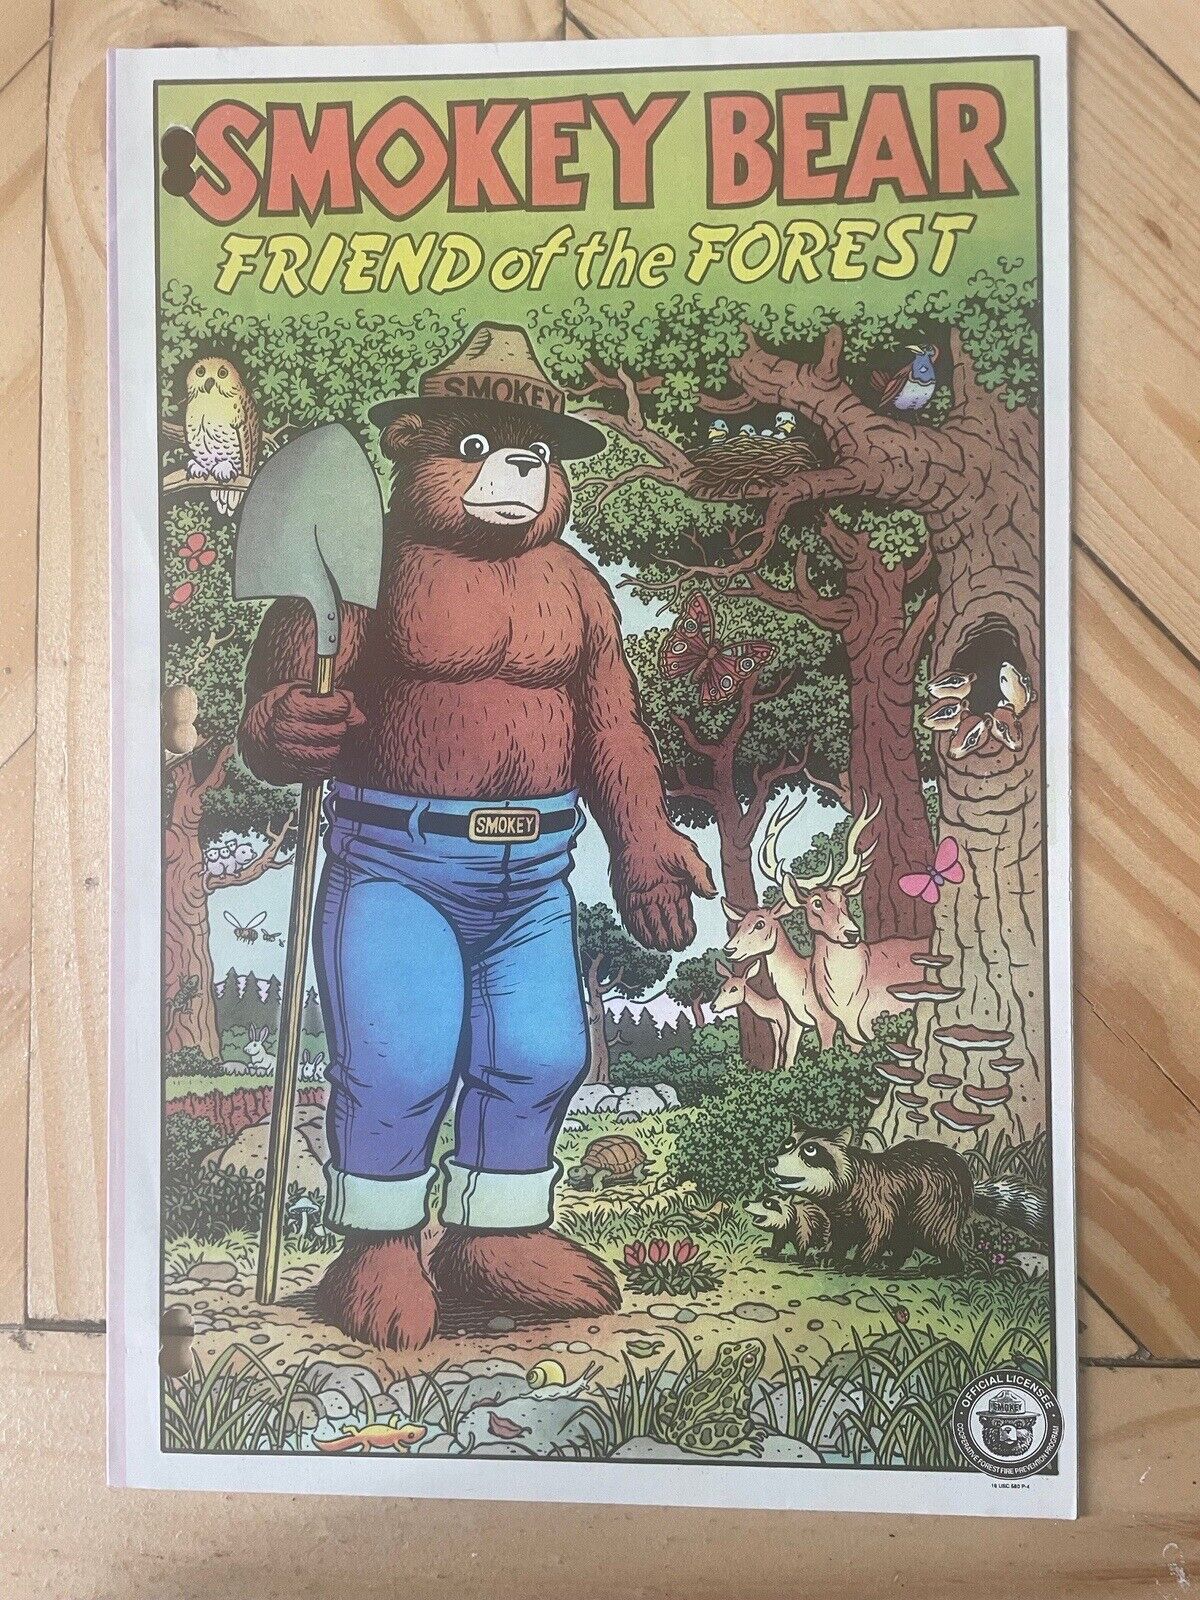 Rare Find Booklet Smokey Bear Friend Of The Forest Conservation Fire Prevention